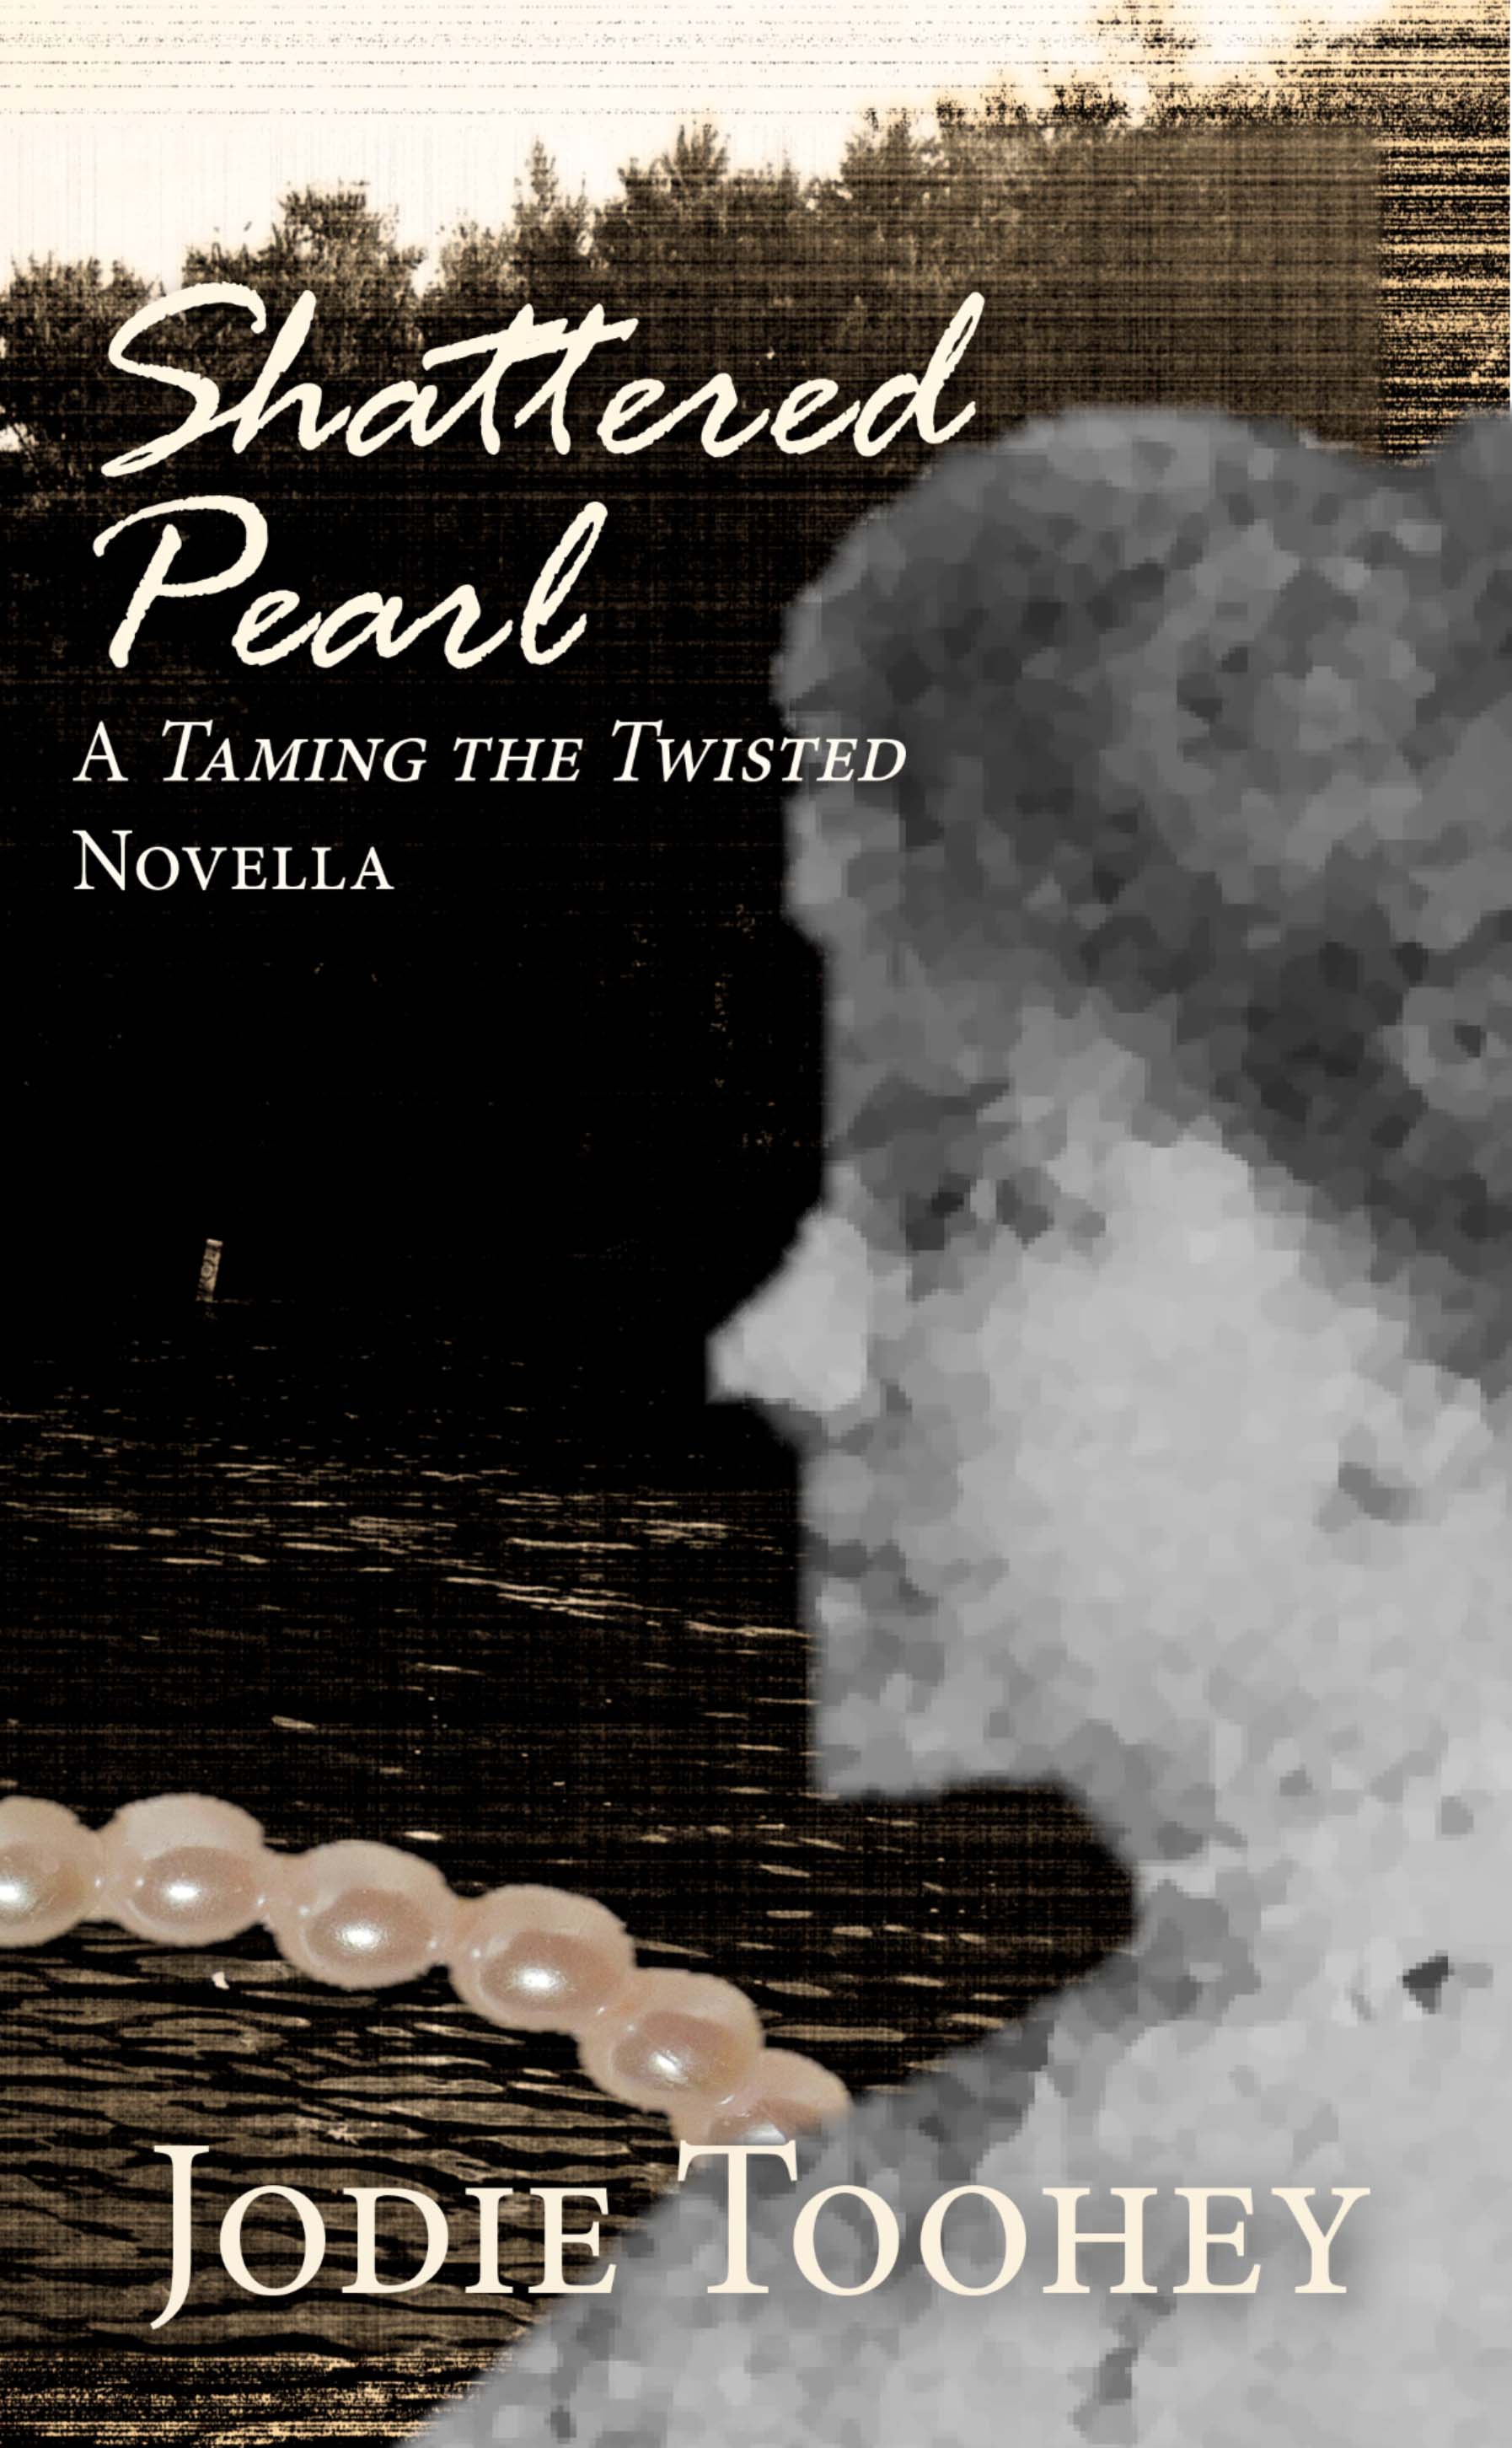 FREE: Shattered Pearl: A Taming the Twisted Novella by Jodie Toohey